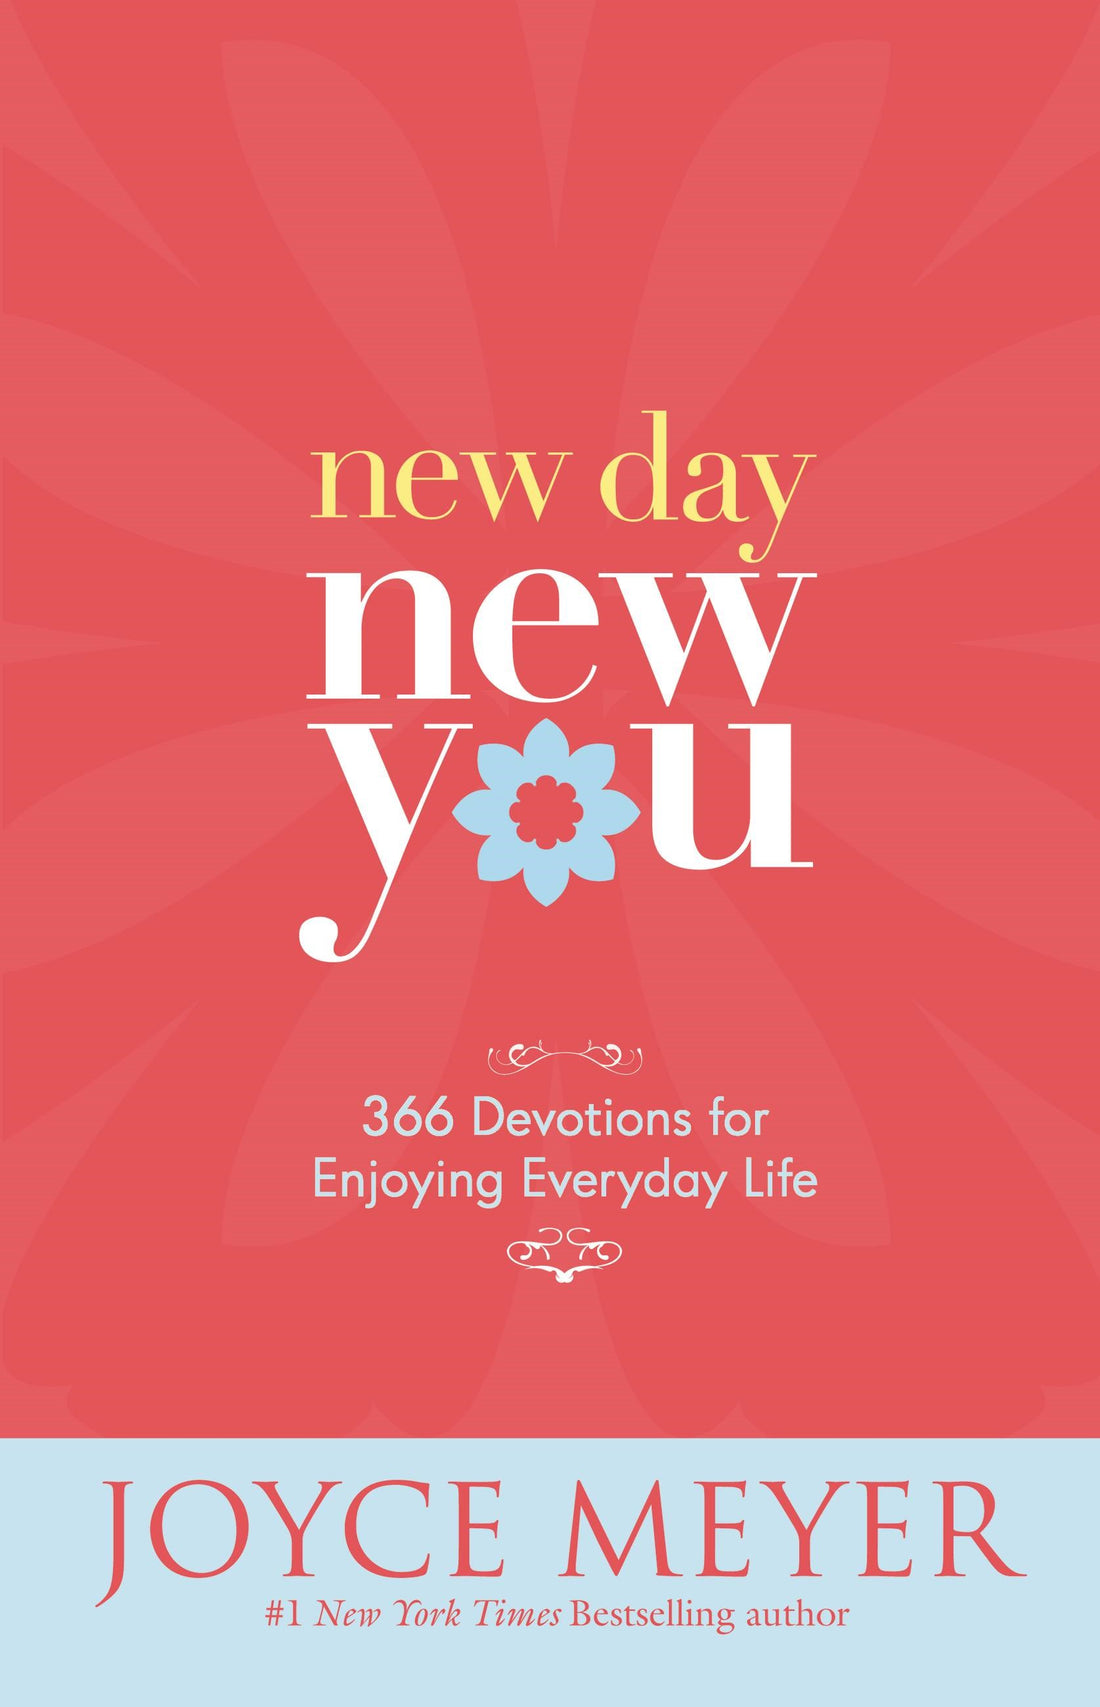 Seed of Abraham Christian Bookstore - Joyce Meyer - New Day New You